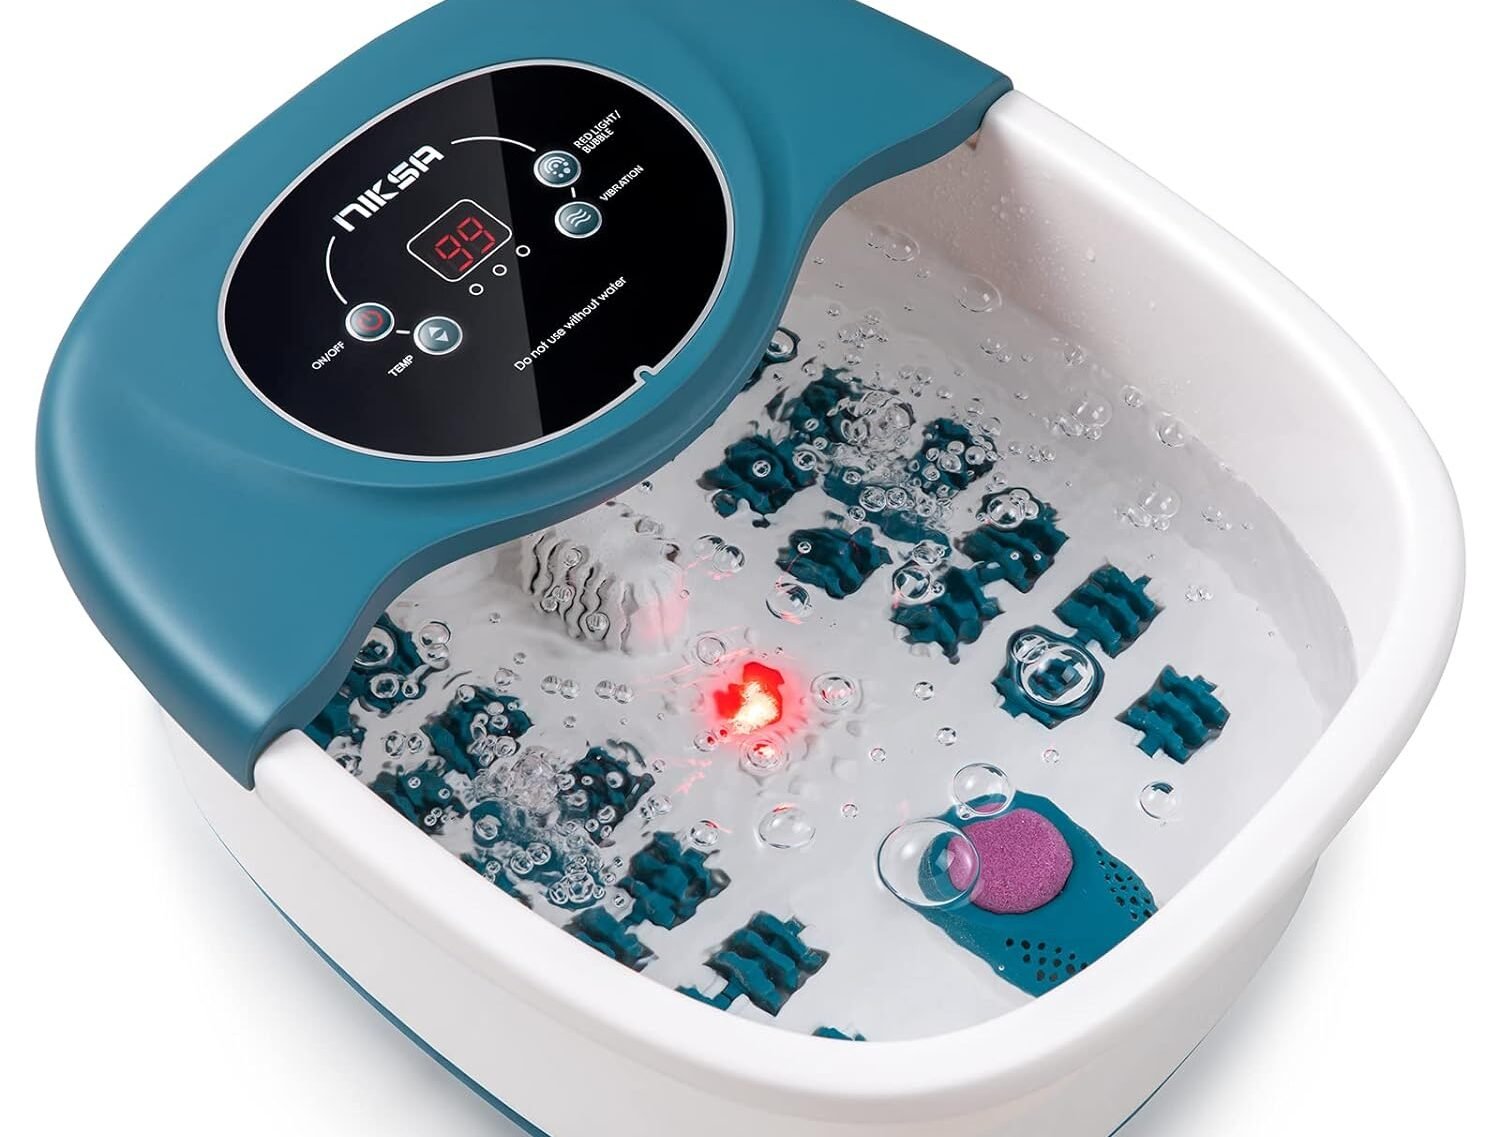 A Comprehensive Review of the Niksa Foot Spa Bath Massager with Heat